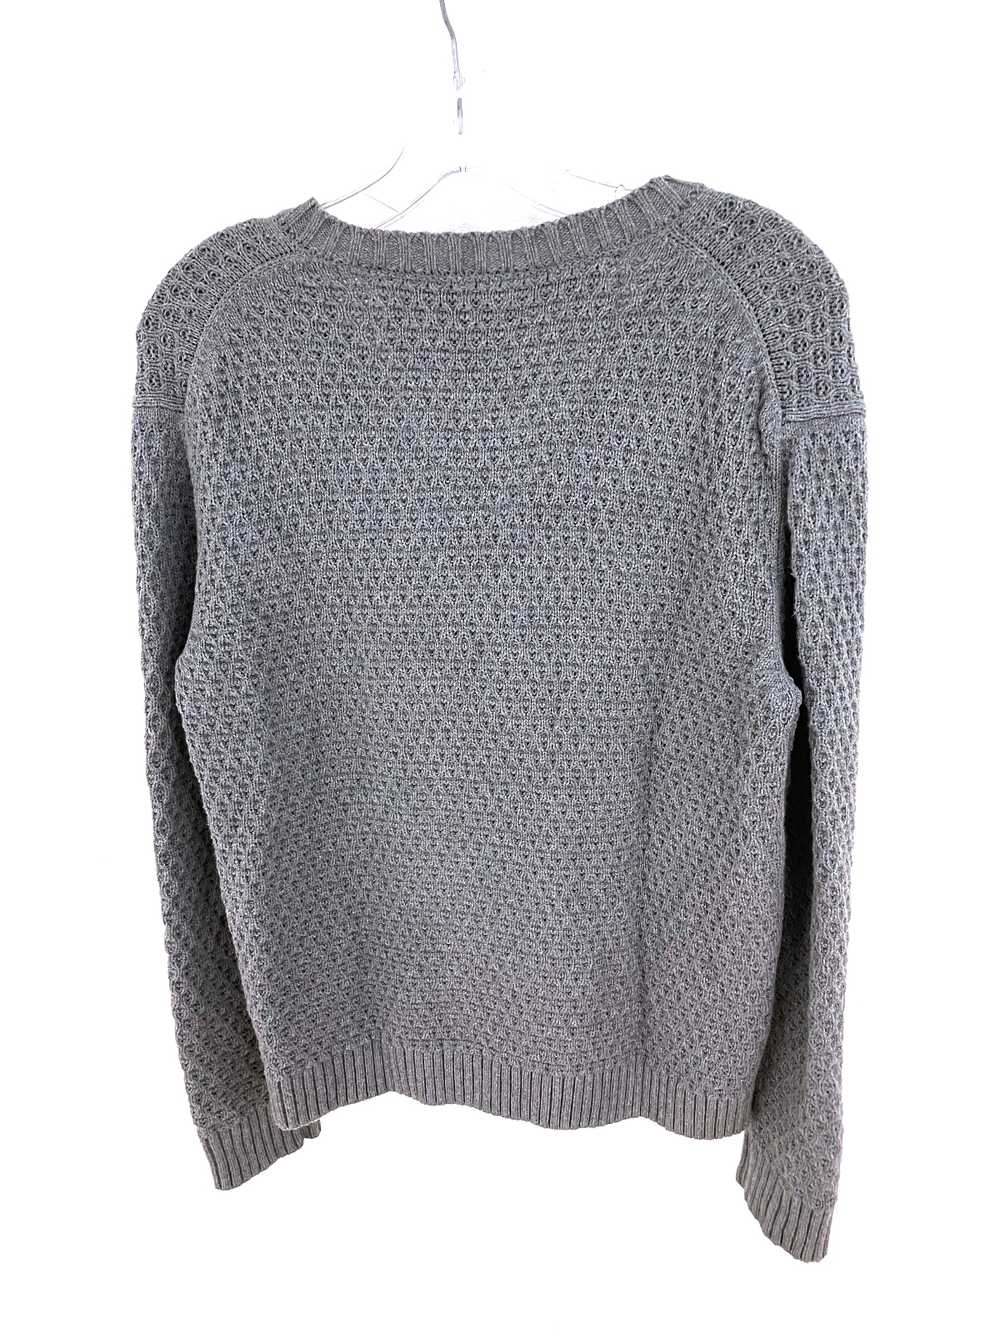 UNDERCOVER SS13 Heaven Talking Heads Sweater - image 7